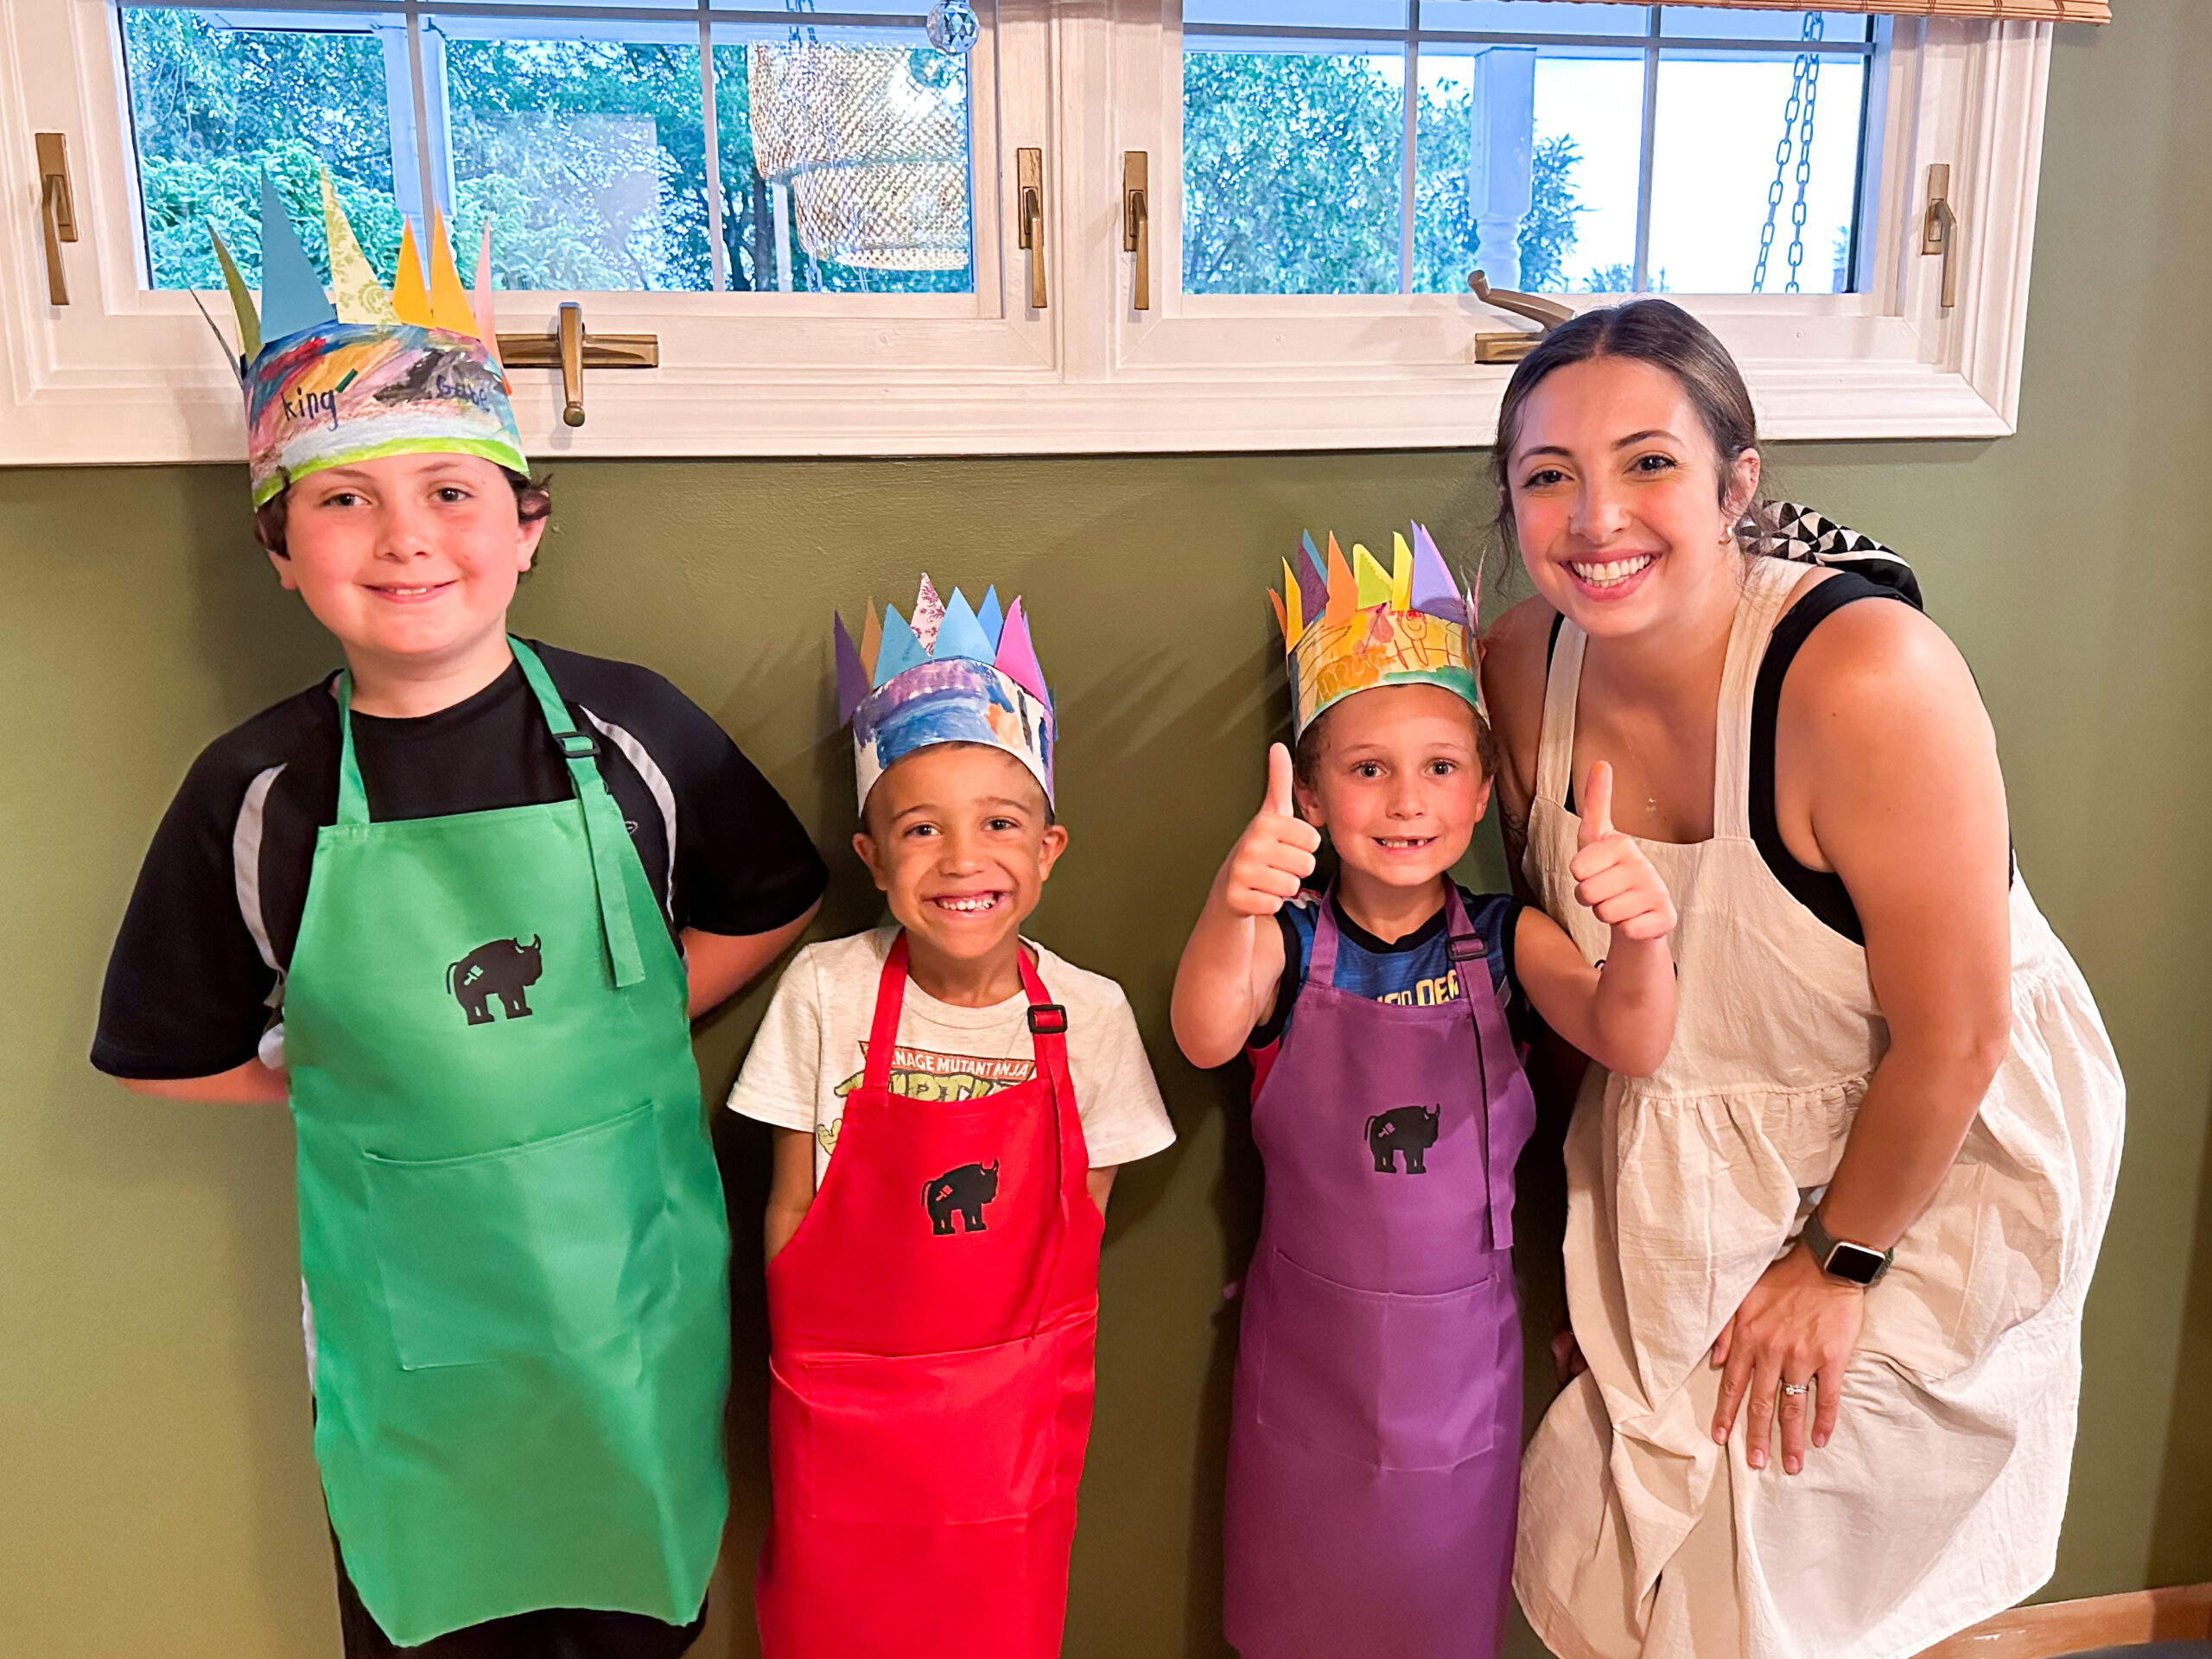 kids showing their completed paper crown craft at a birthday party